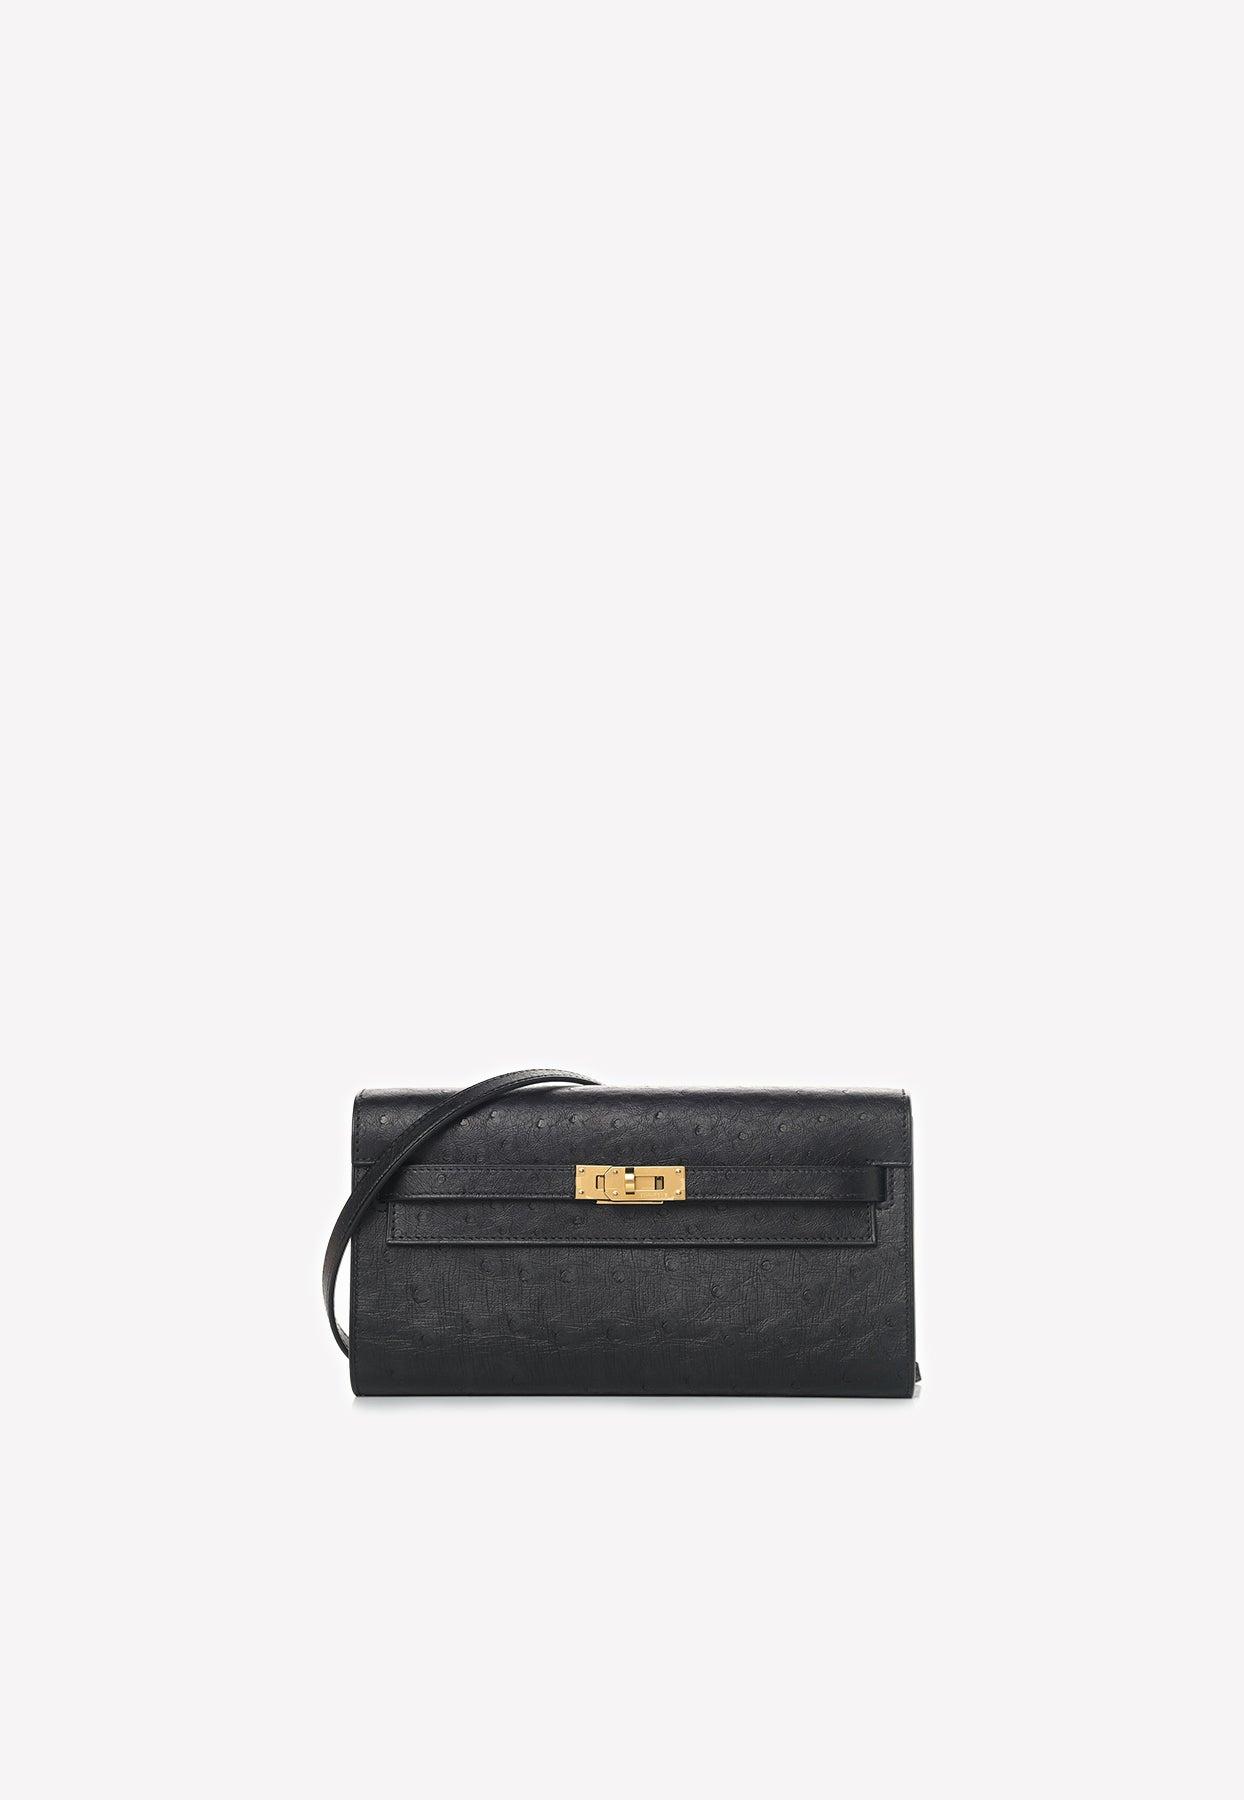 Hermès Kelly To Go Wallet In Black Ostrich With Gold Hardware in